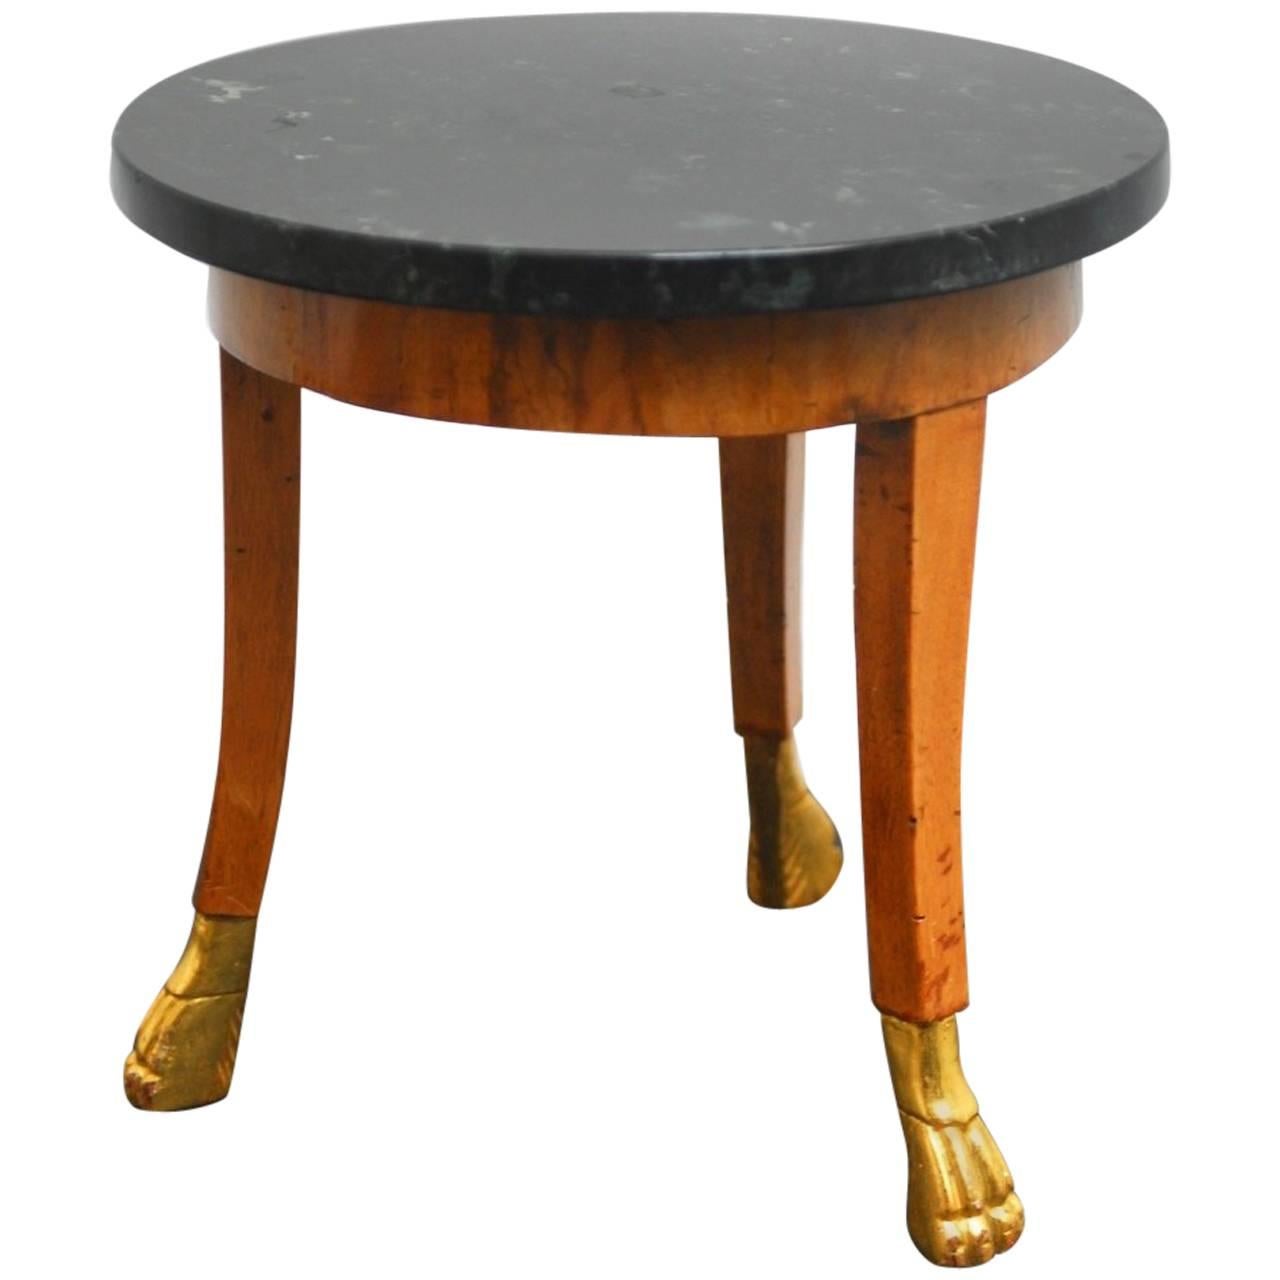 Neoclassical Style Marble Top Drinks Table